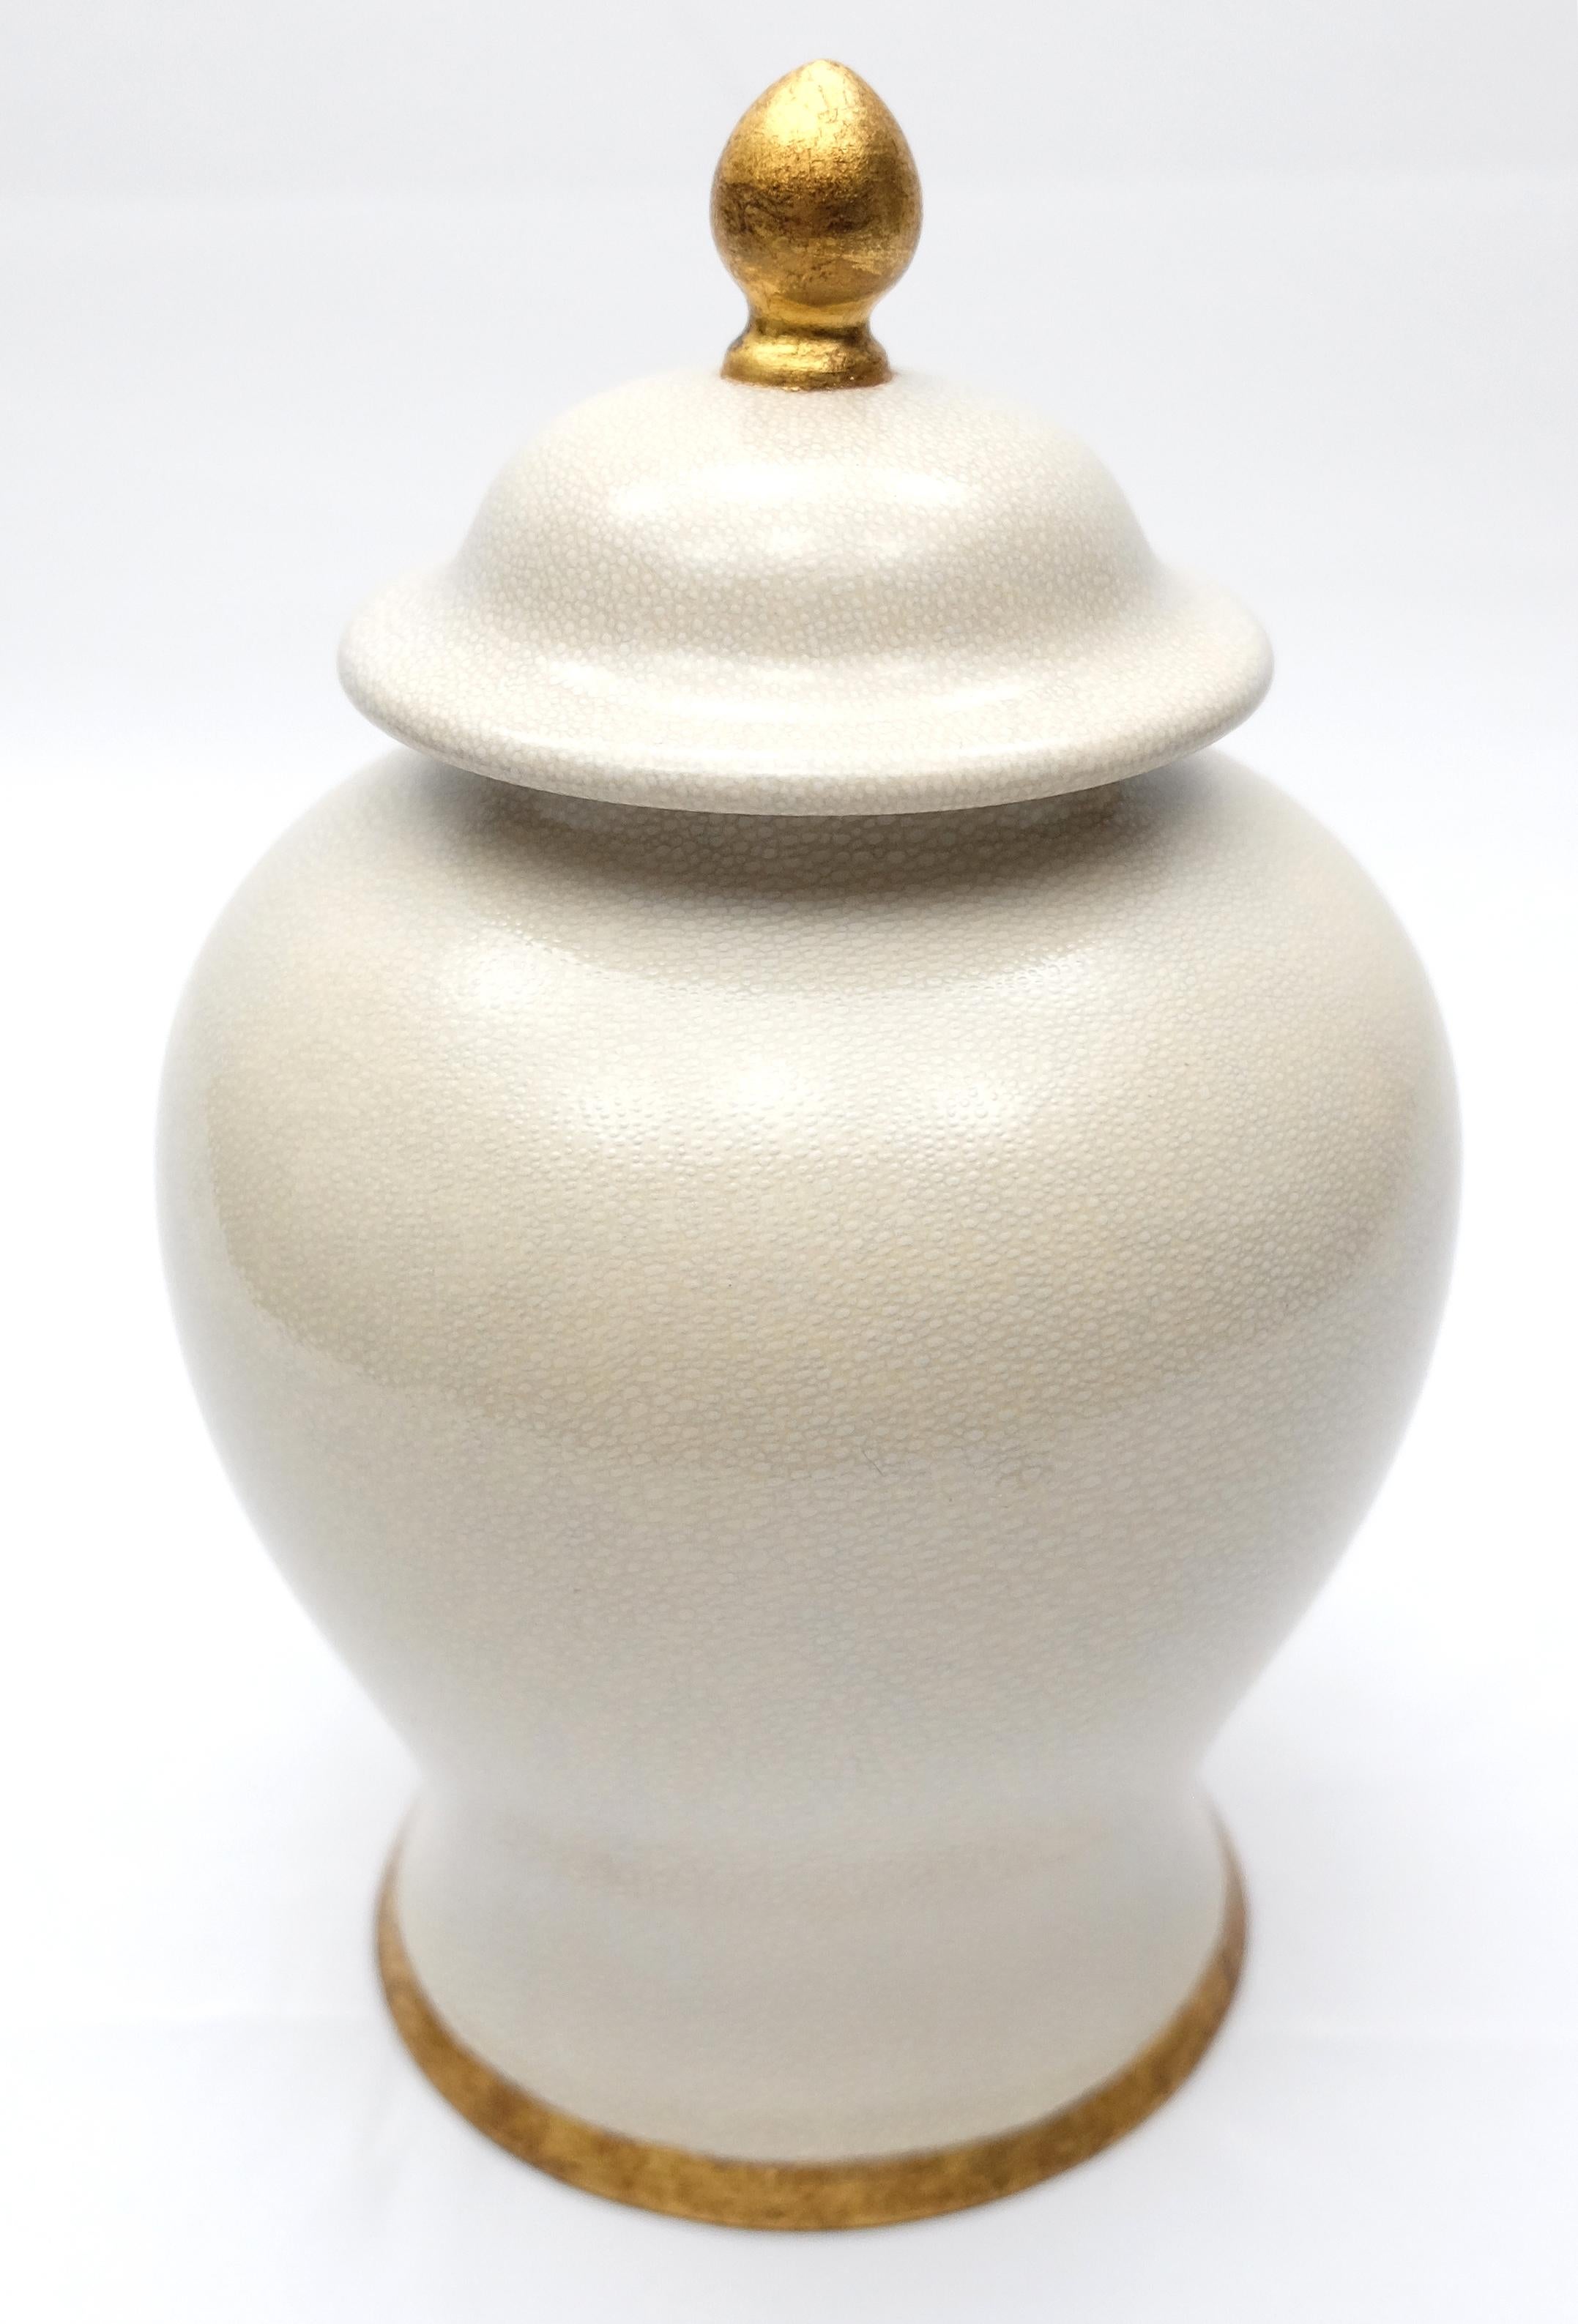 Offered for sale is a set of (2) glazed ceramic lidded ginger jar by Paolo Marioni. The jar has a subtle crazed-glaze finish and is accented in gold-leaf. The jar is signed on the base.